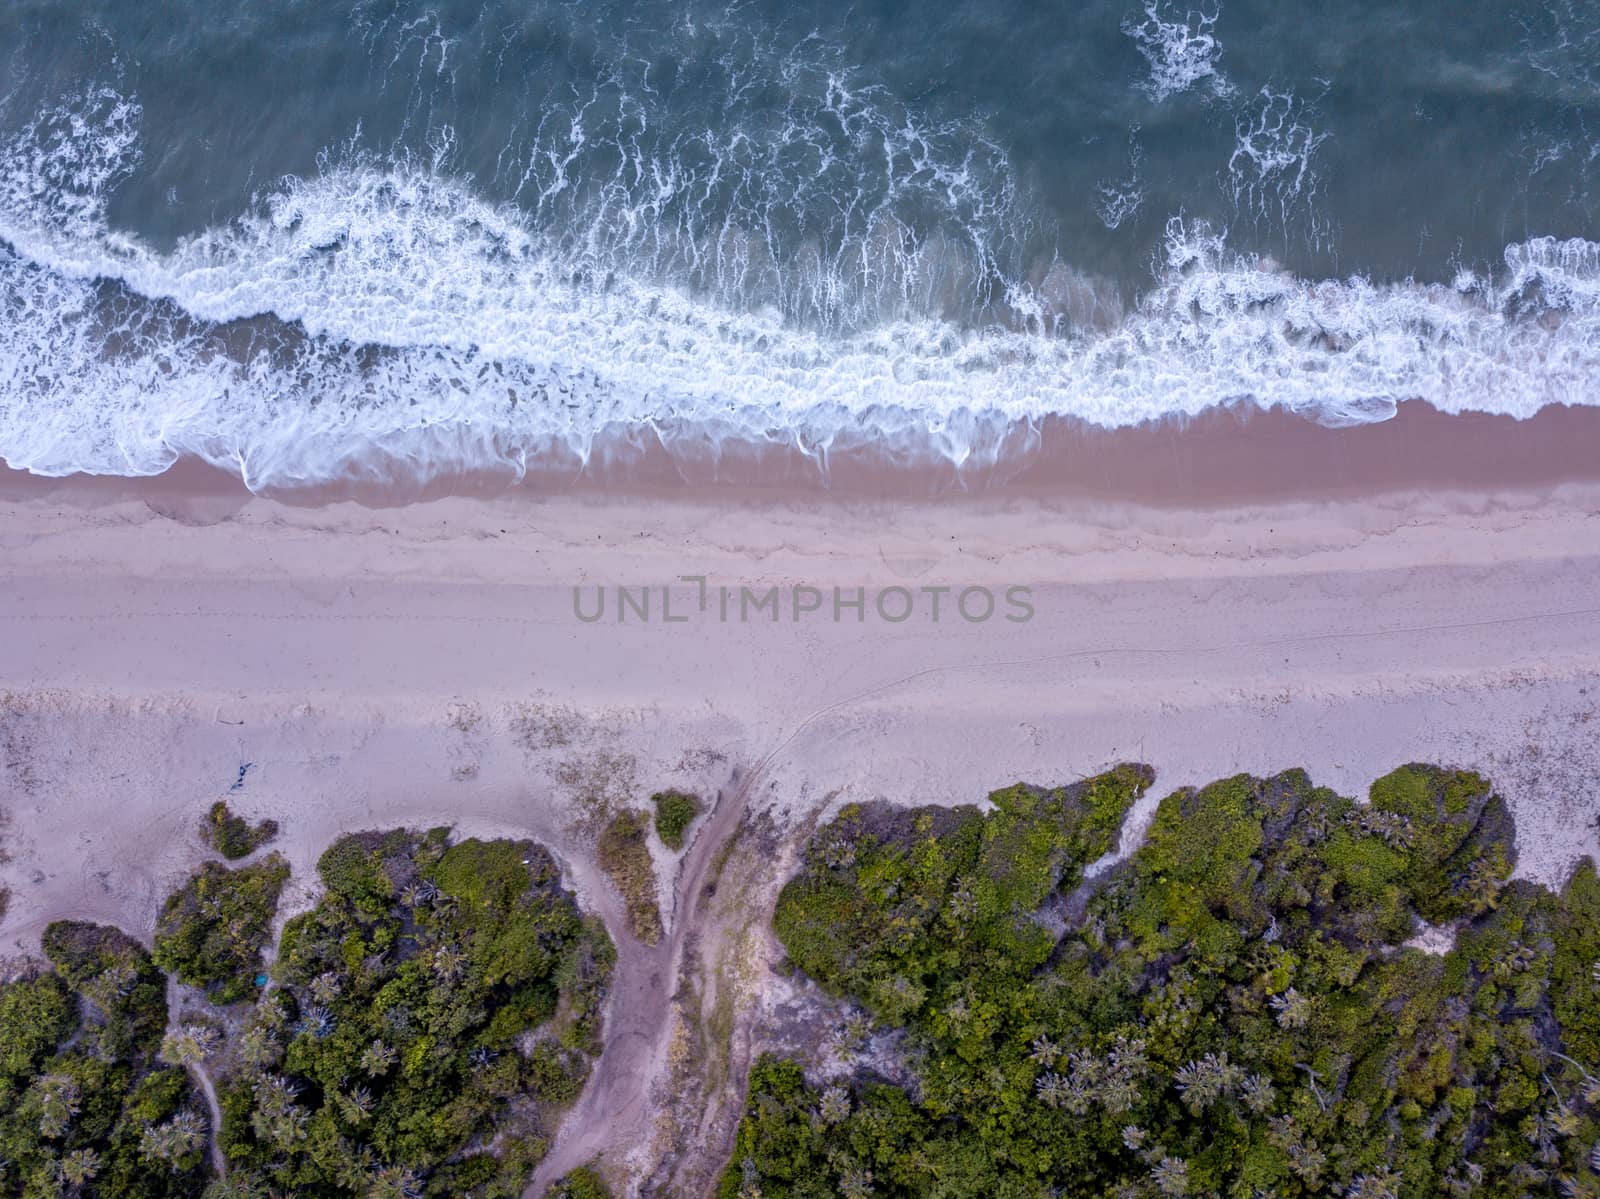 Drone picture of waves hitting the beach. by Simoneemanphotography